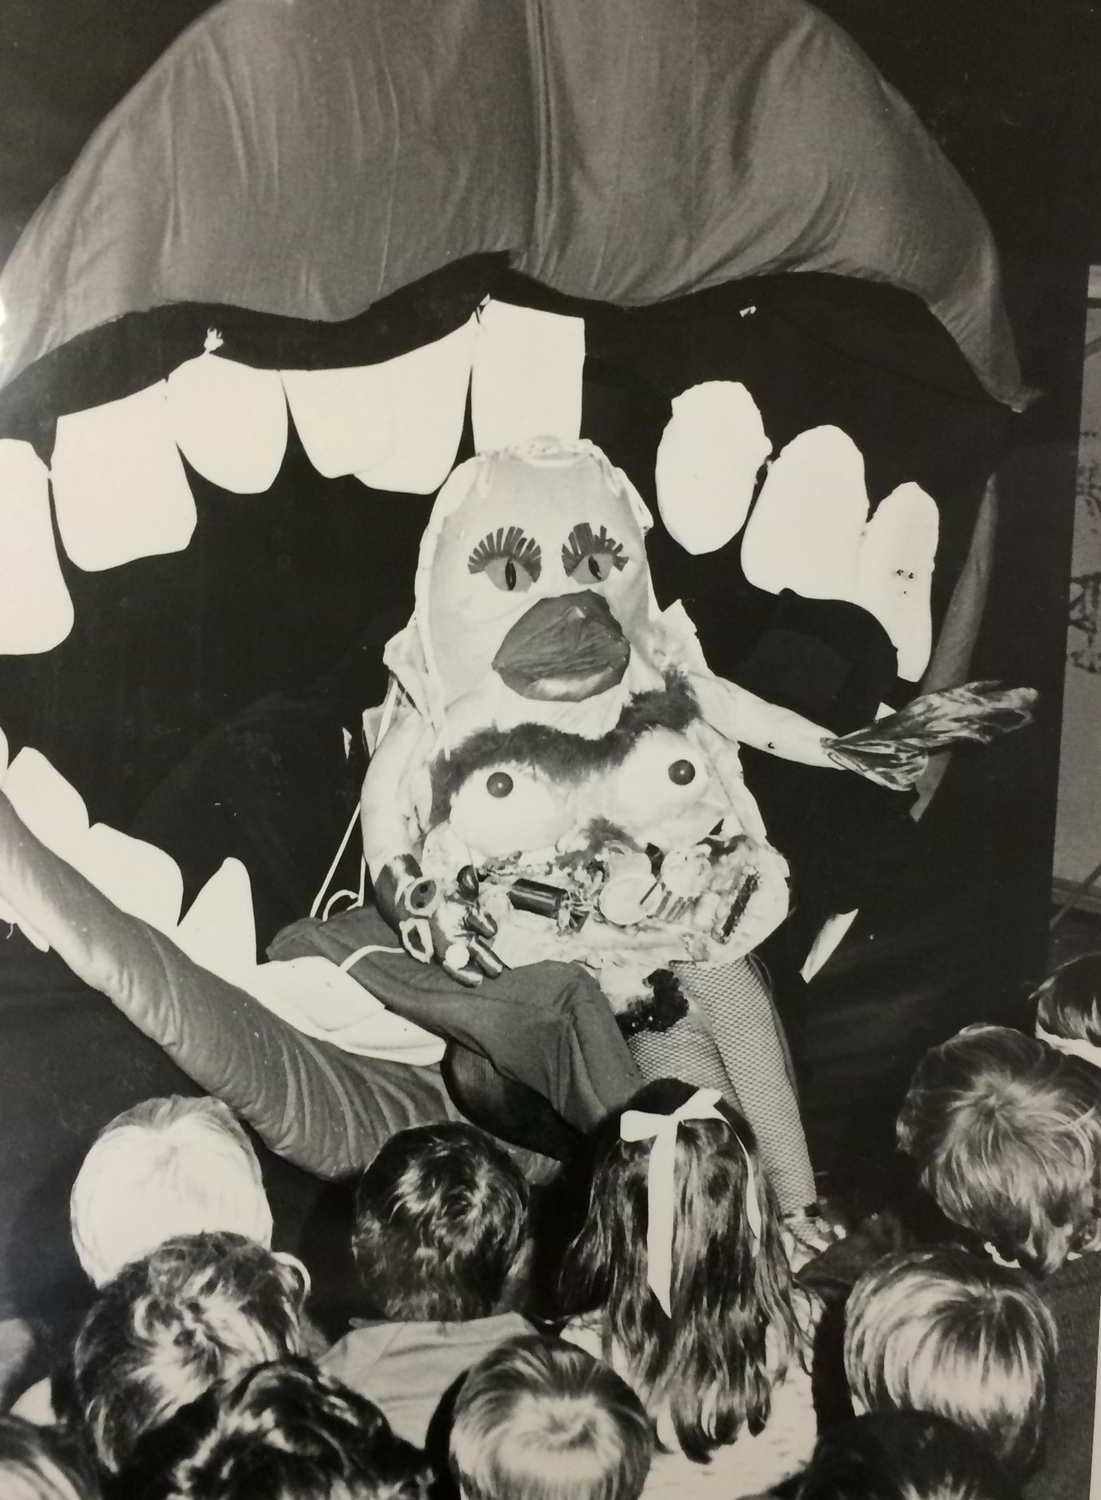 Handspan Theatre The Mouth Show, Sugar, a garish puppet with ice-cream breasts and cherry nipples being rolled into the mouth by its tongue